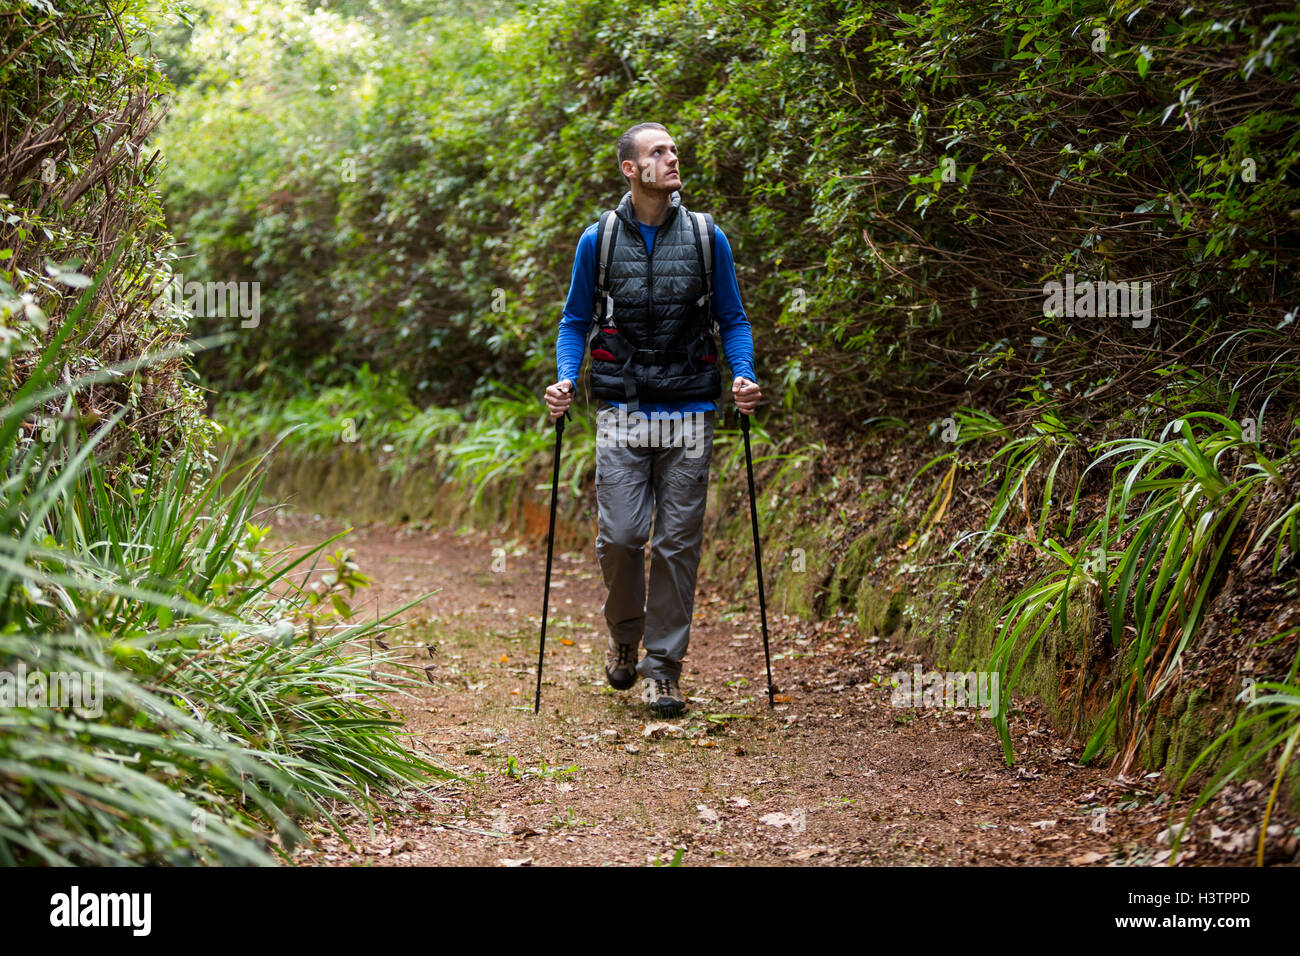 Male hiker walking with hiking pole Stock Photo